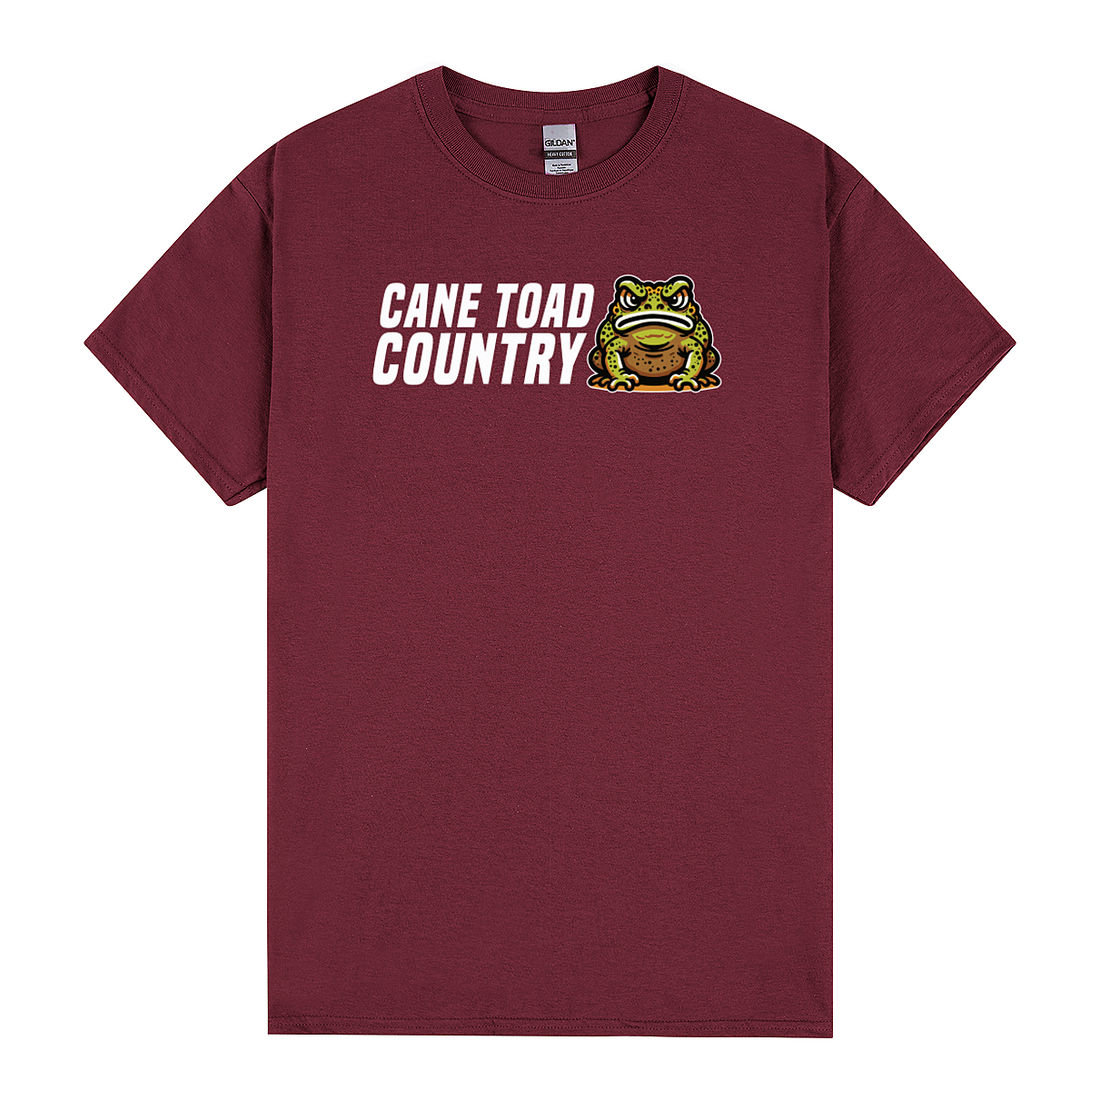 Cane Toad Country Tee